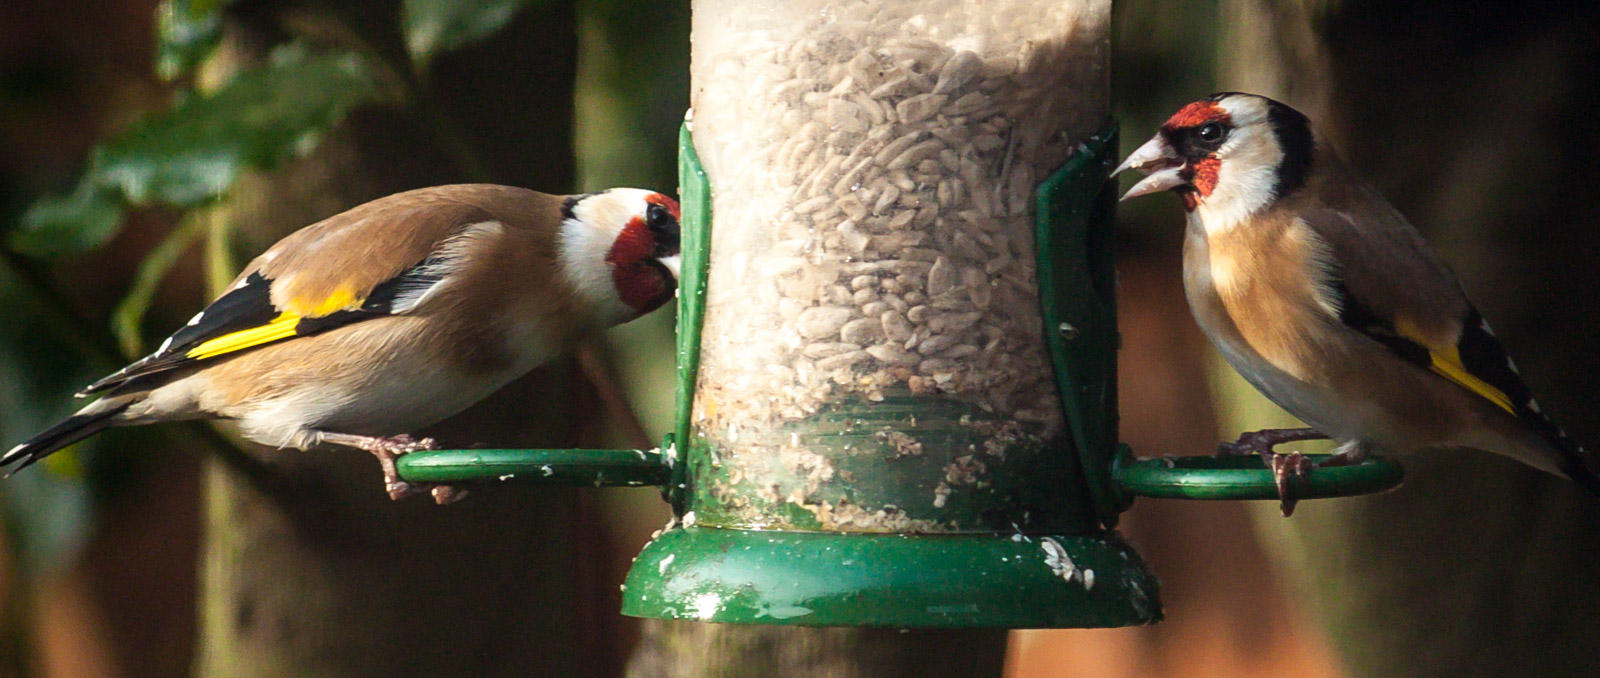 Pair of Goldfinches IMG_0035.jpg